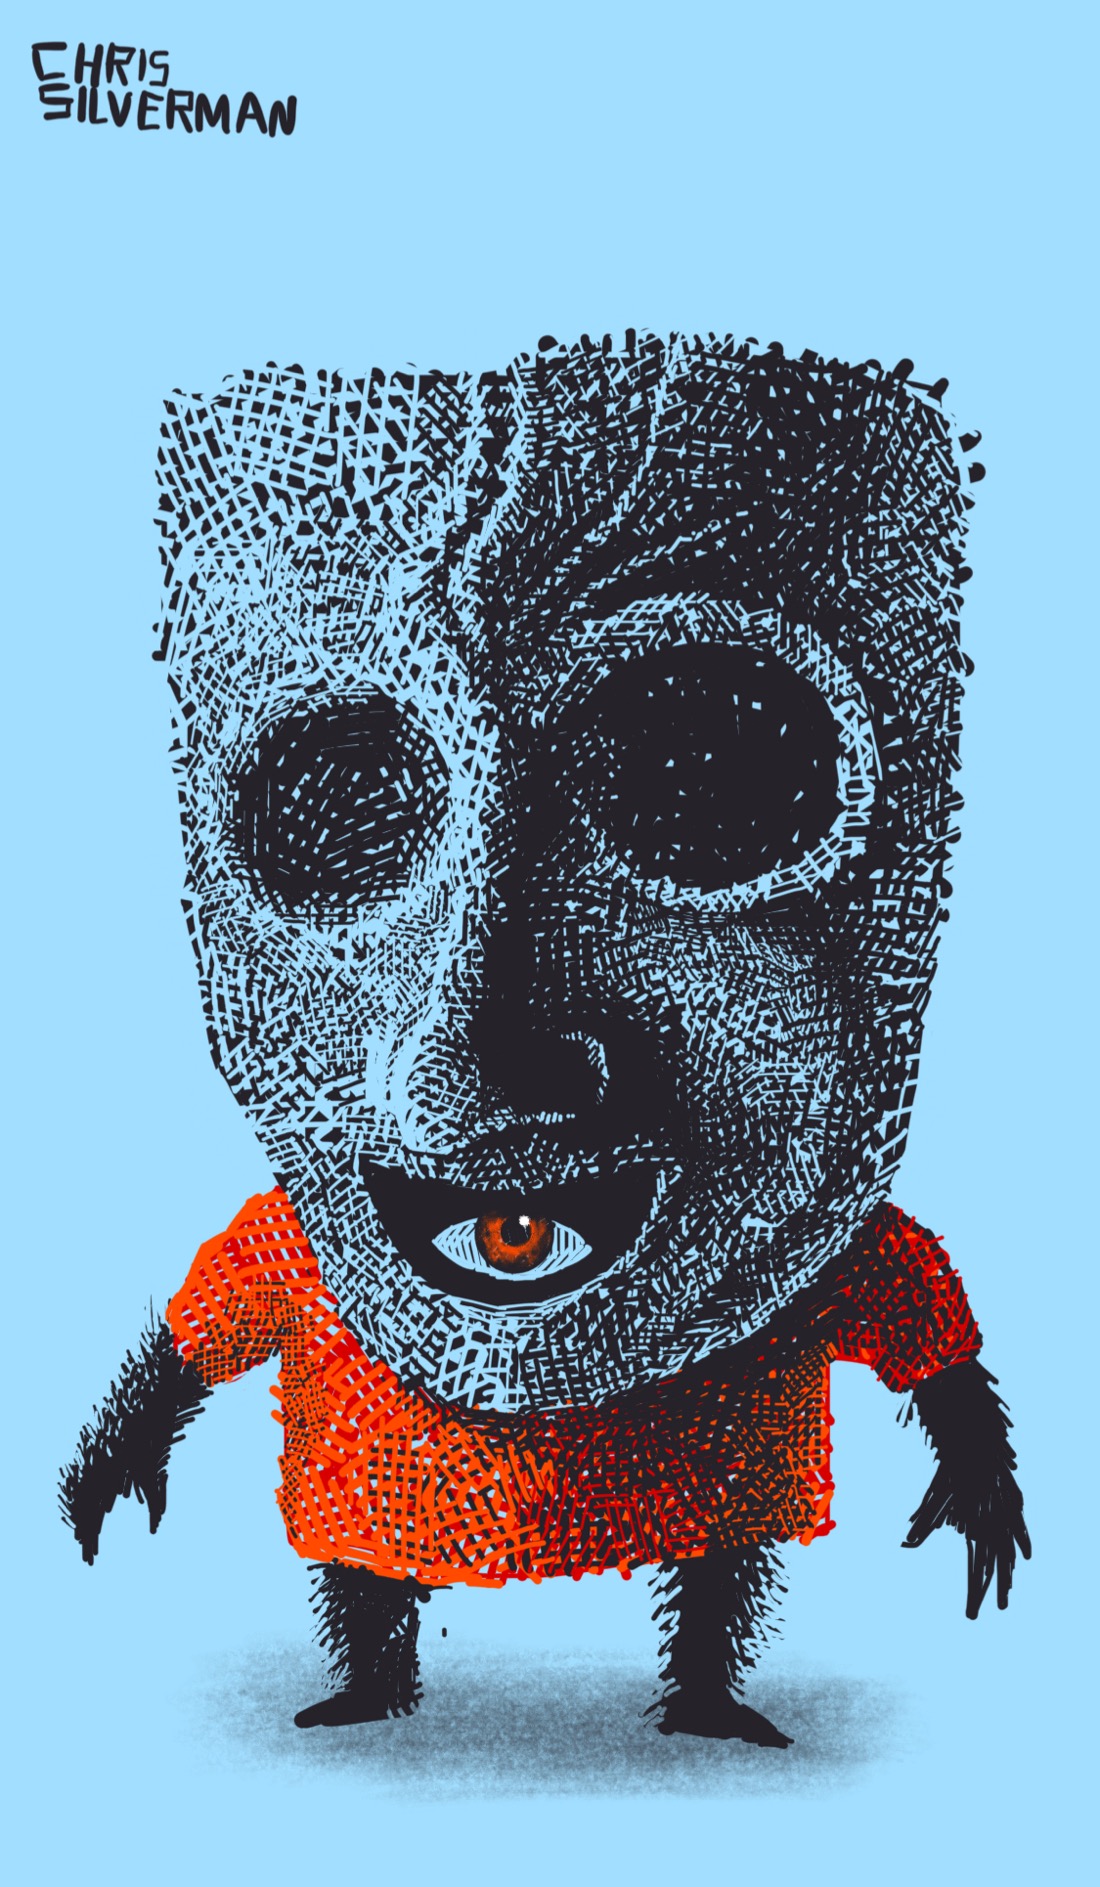 A short, squat creature wearing a giant mask. The mask looks similar to those classic theatrical ones: shield-shaped and minimal, with two empty eyes and a smiling open mouth. There are several wrinkles in the forehead. Visible in the mouth is the single eye of the creature wearing the mask. The creature has two furry arms and legs, and is wearing an orange shirt. This is a mostly black drawing on a light blue background.